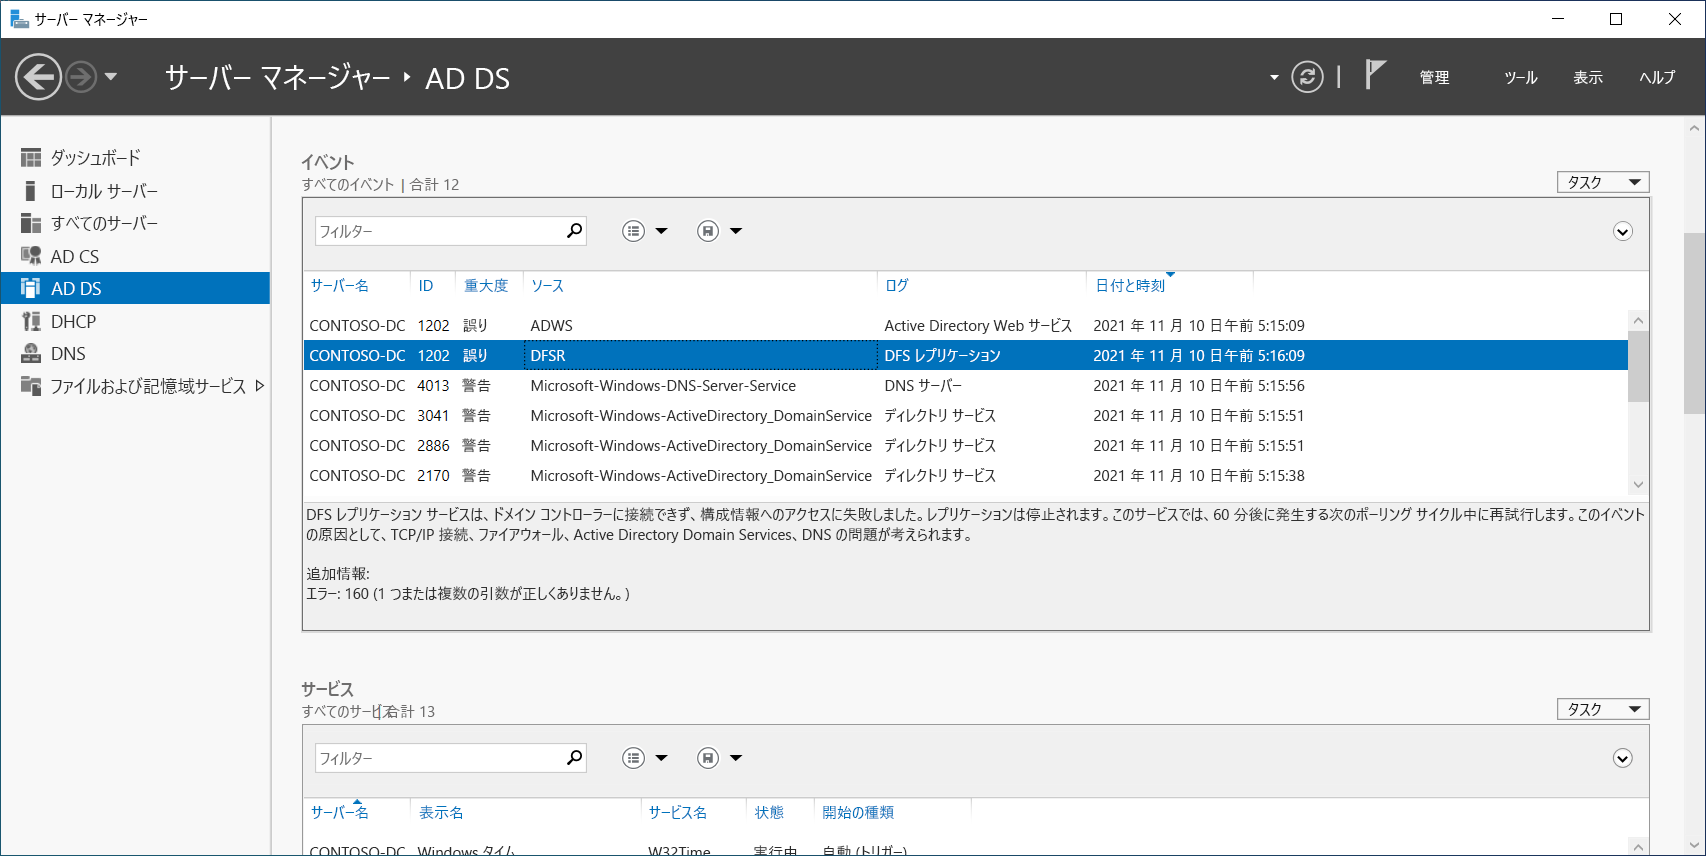 This screenshot displays events relating to AD DS; specifically an error related to DFSR.